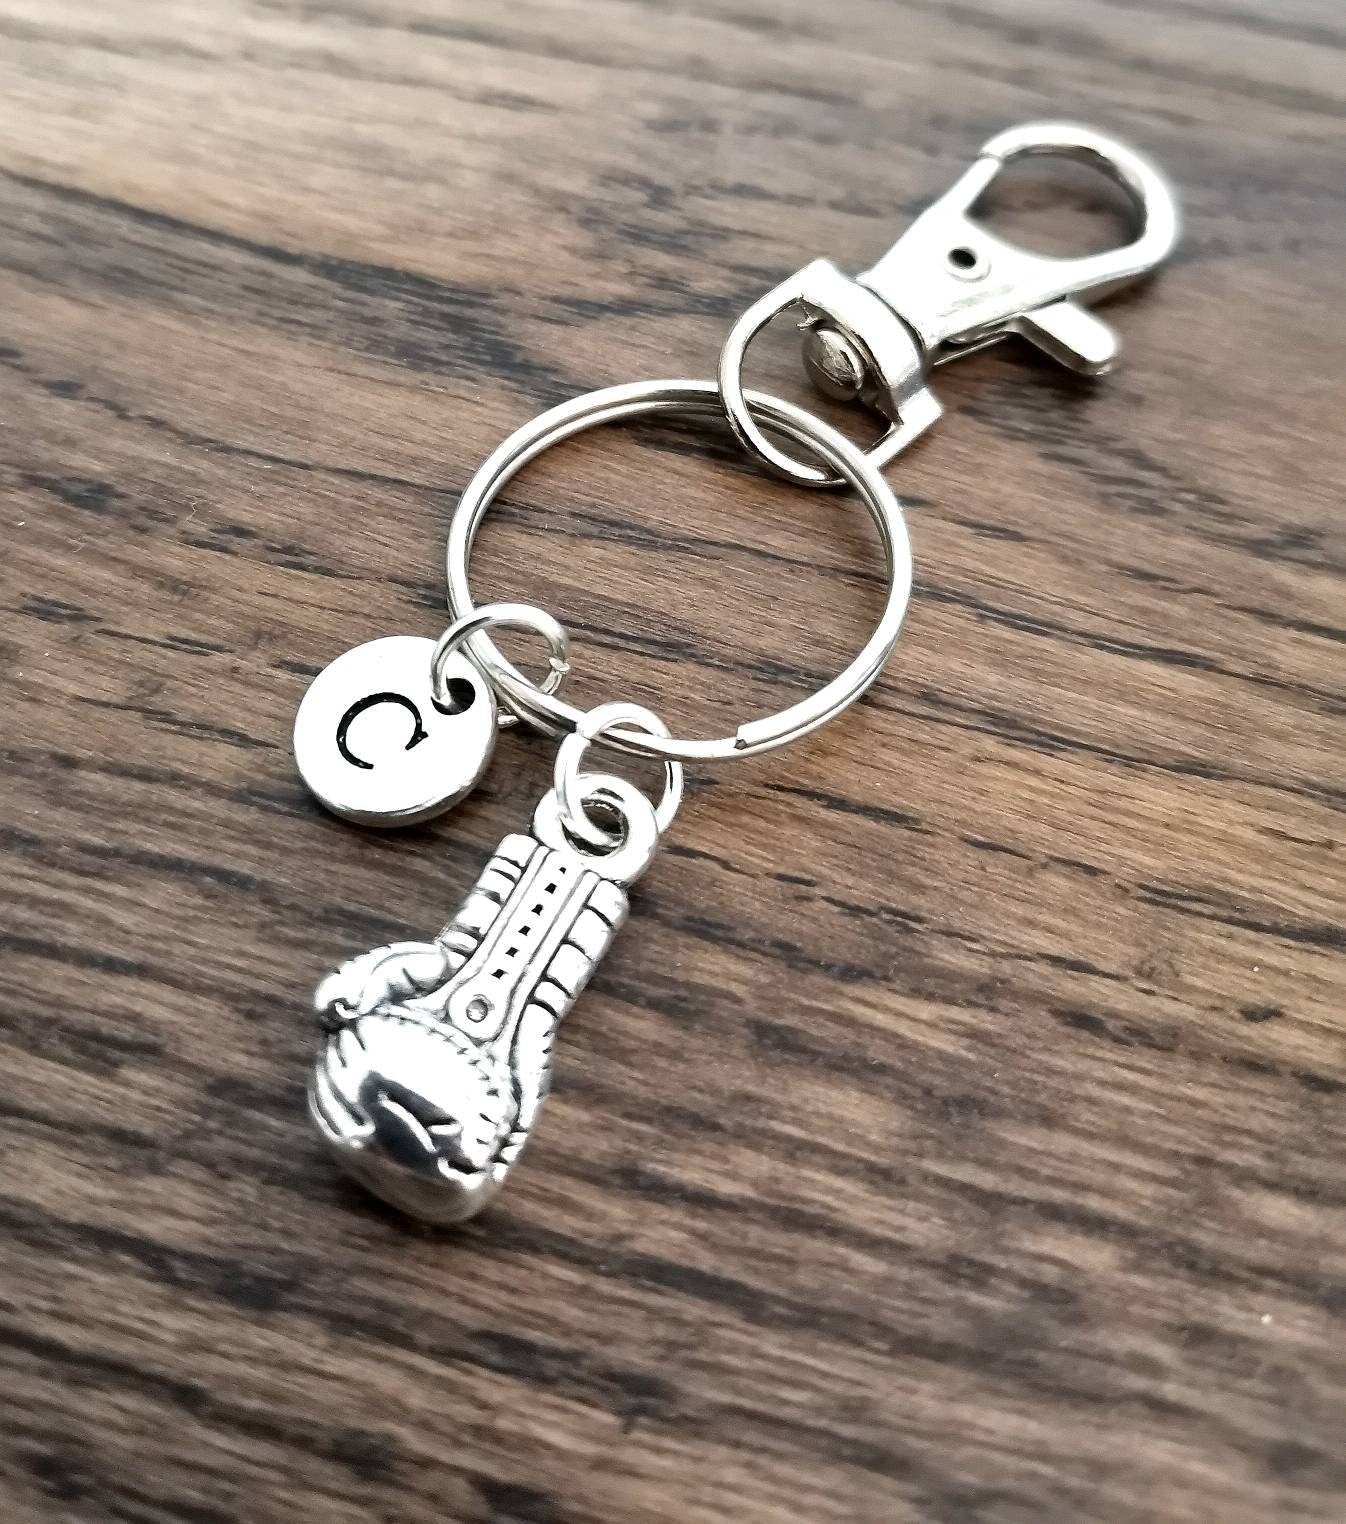 Boyfriend keyring, Boyfriend Gift, Boxing gift, Boxing Glove keychain, Gift for him, Fitness gift, Fitness lover, Gym, Unique gifts, initial